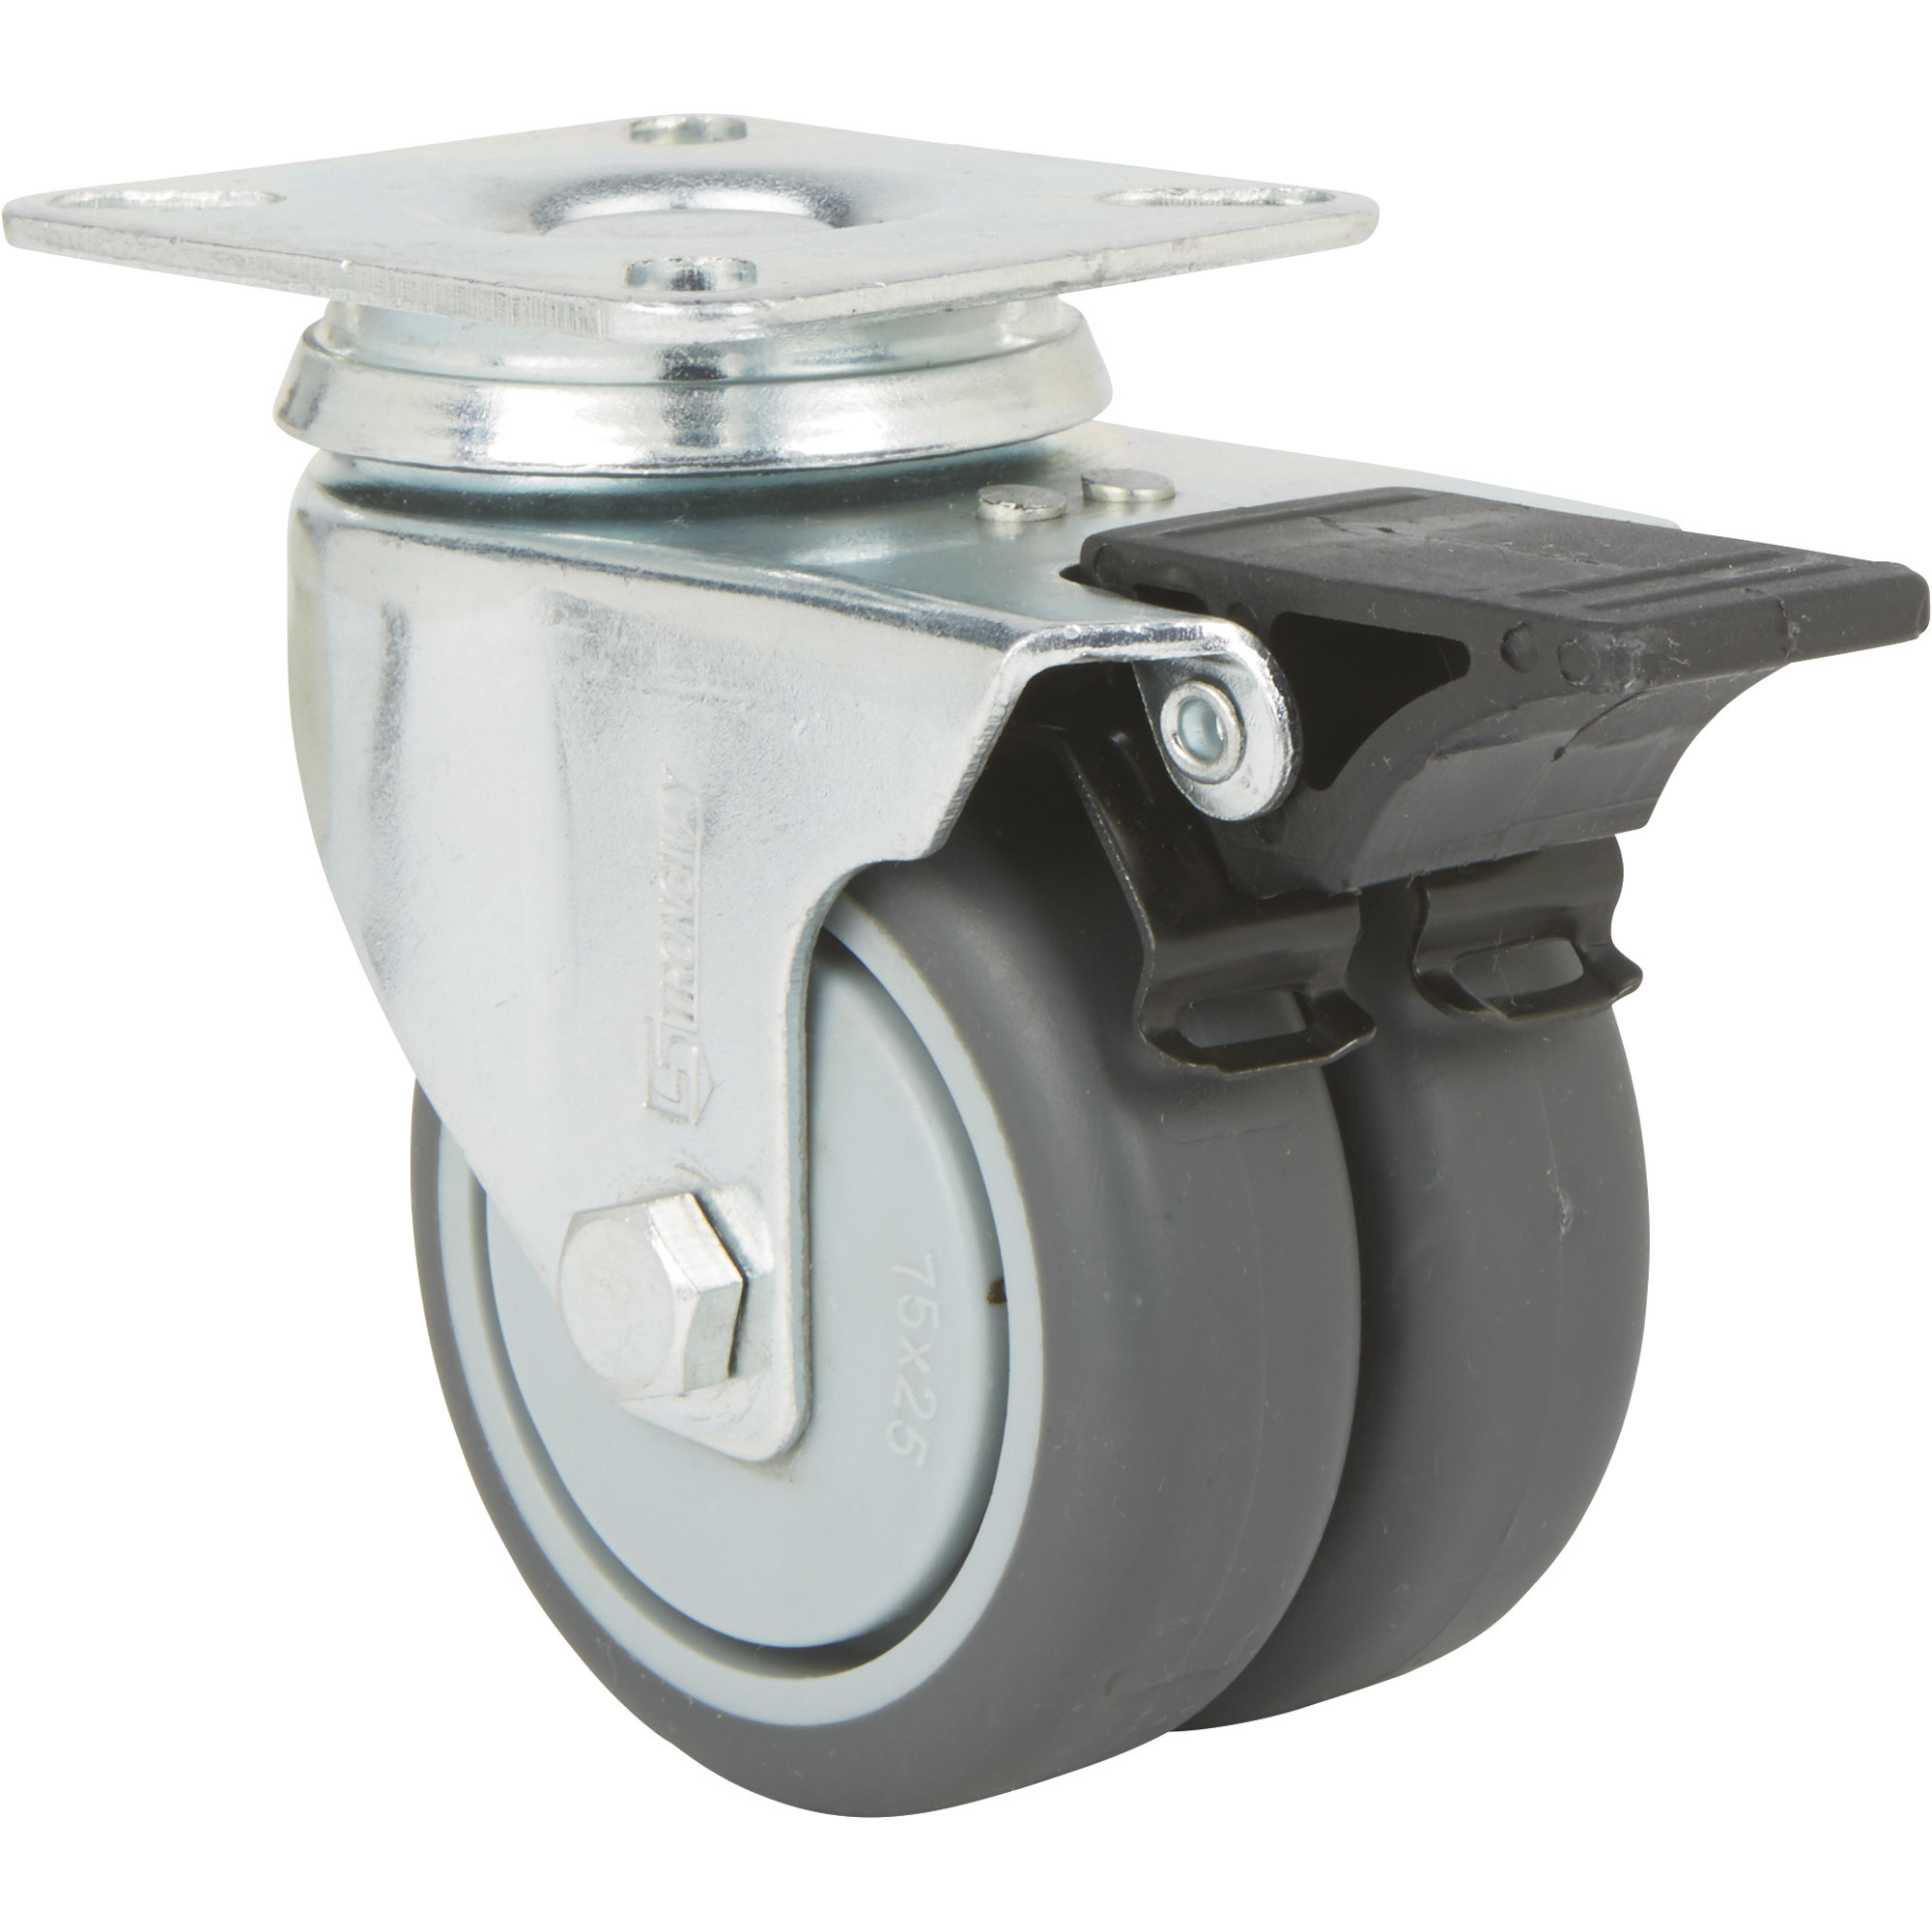 Strongway 3Inch Swivel Dual-Wheel Caster with Brake, 330-Lb. Capacity, Thermoplastic Rubber Wheels